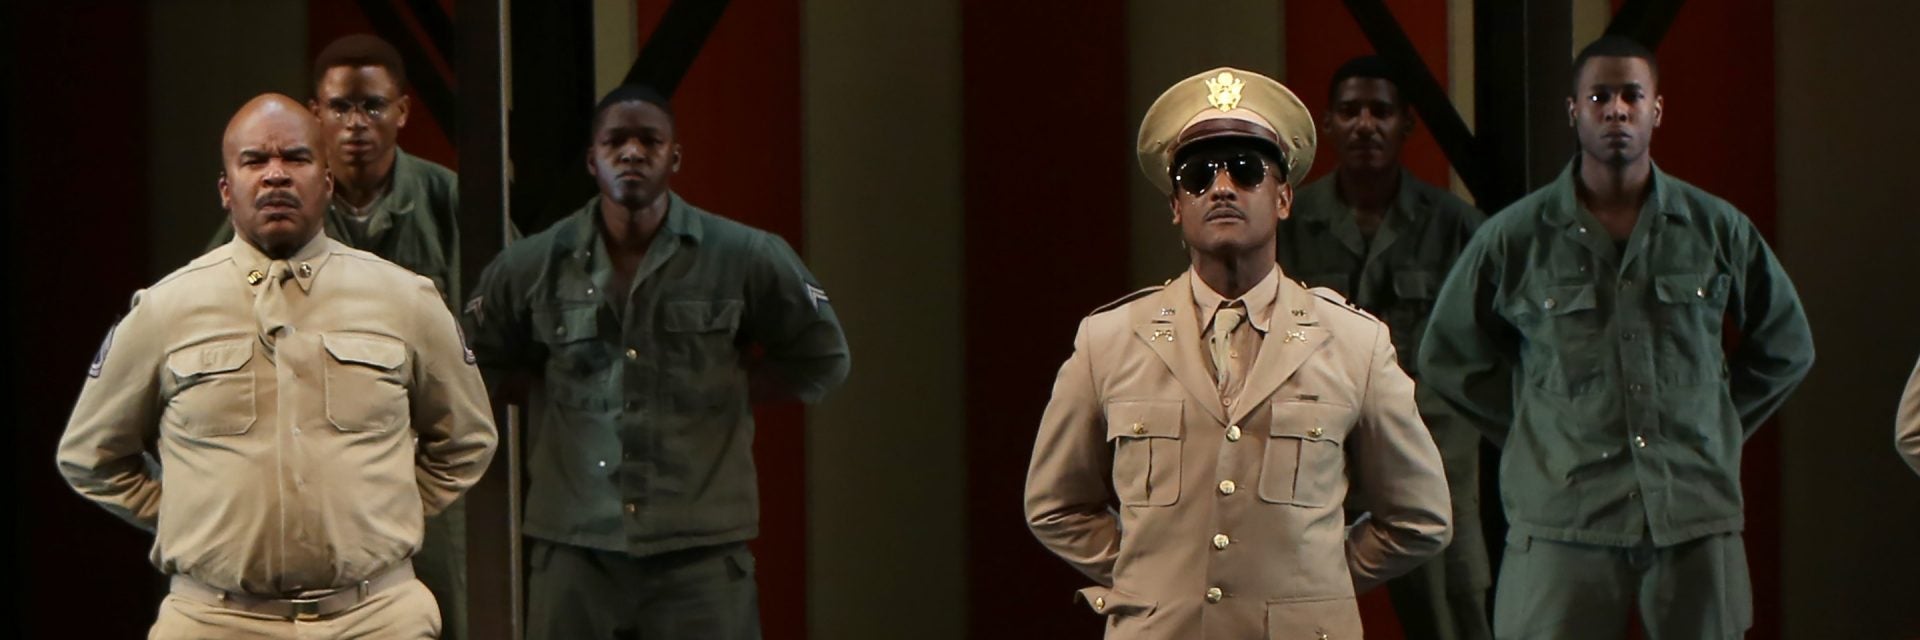 Brothers In Arms: 'A Soldier's Play' Return To Broadway Is As Timely As Ever